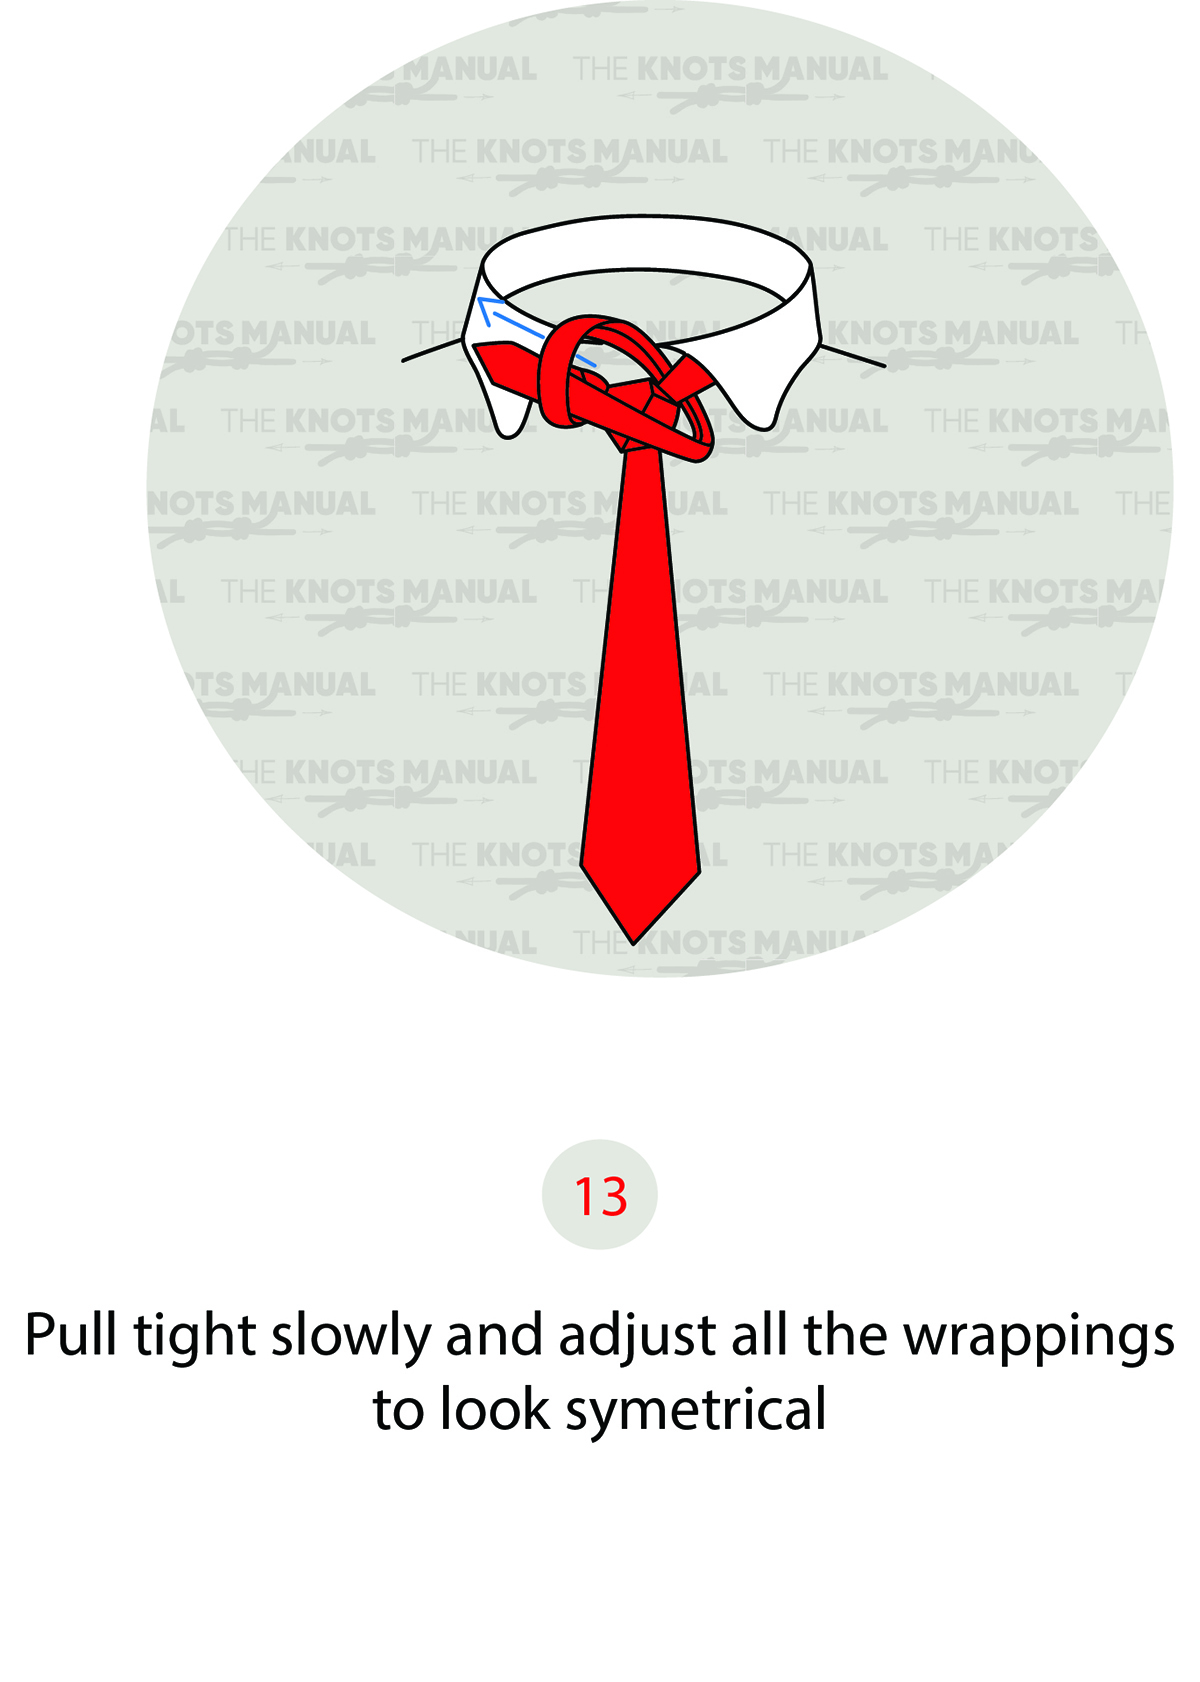 How to Tie the Eldredge Tie Knot (Quick Guide)